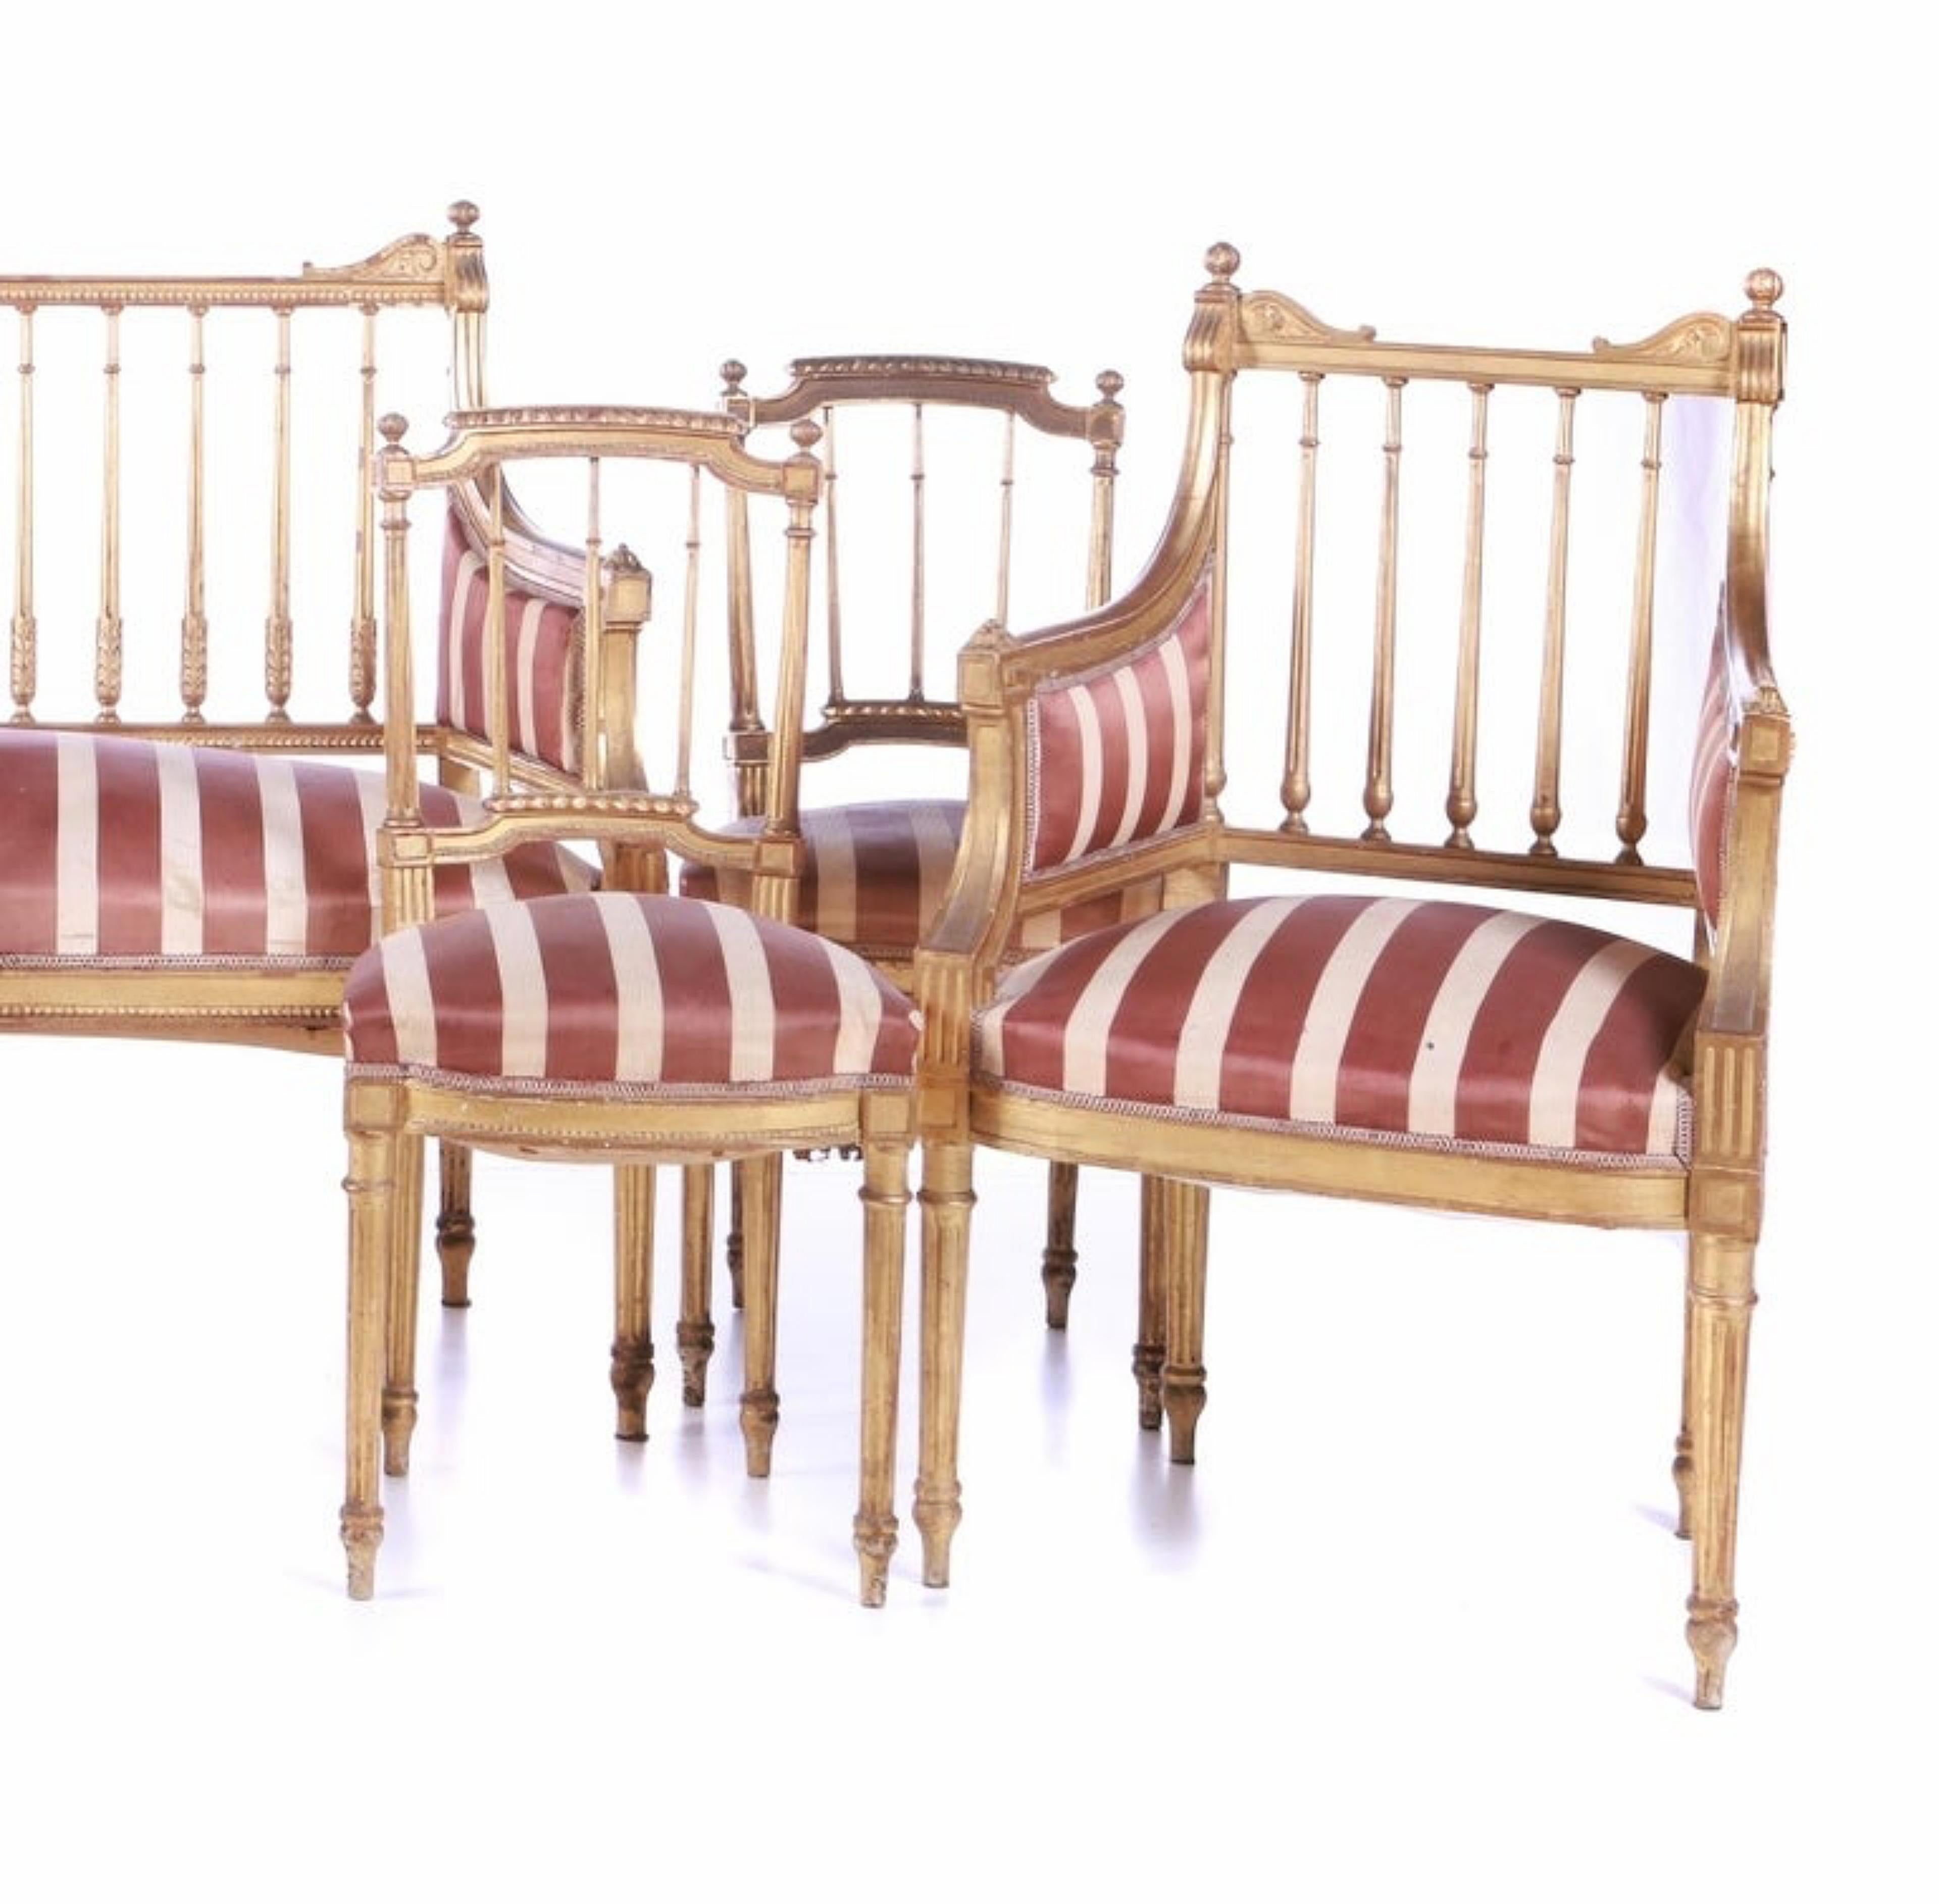 Hand-Crafted French Canape Set, 4 Chairs and 2 Armchairs Late 19th Century Early 20th Century For Sale